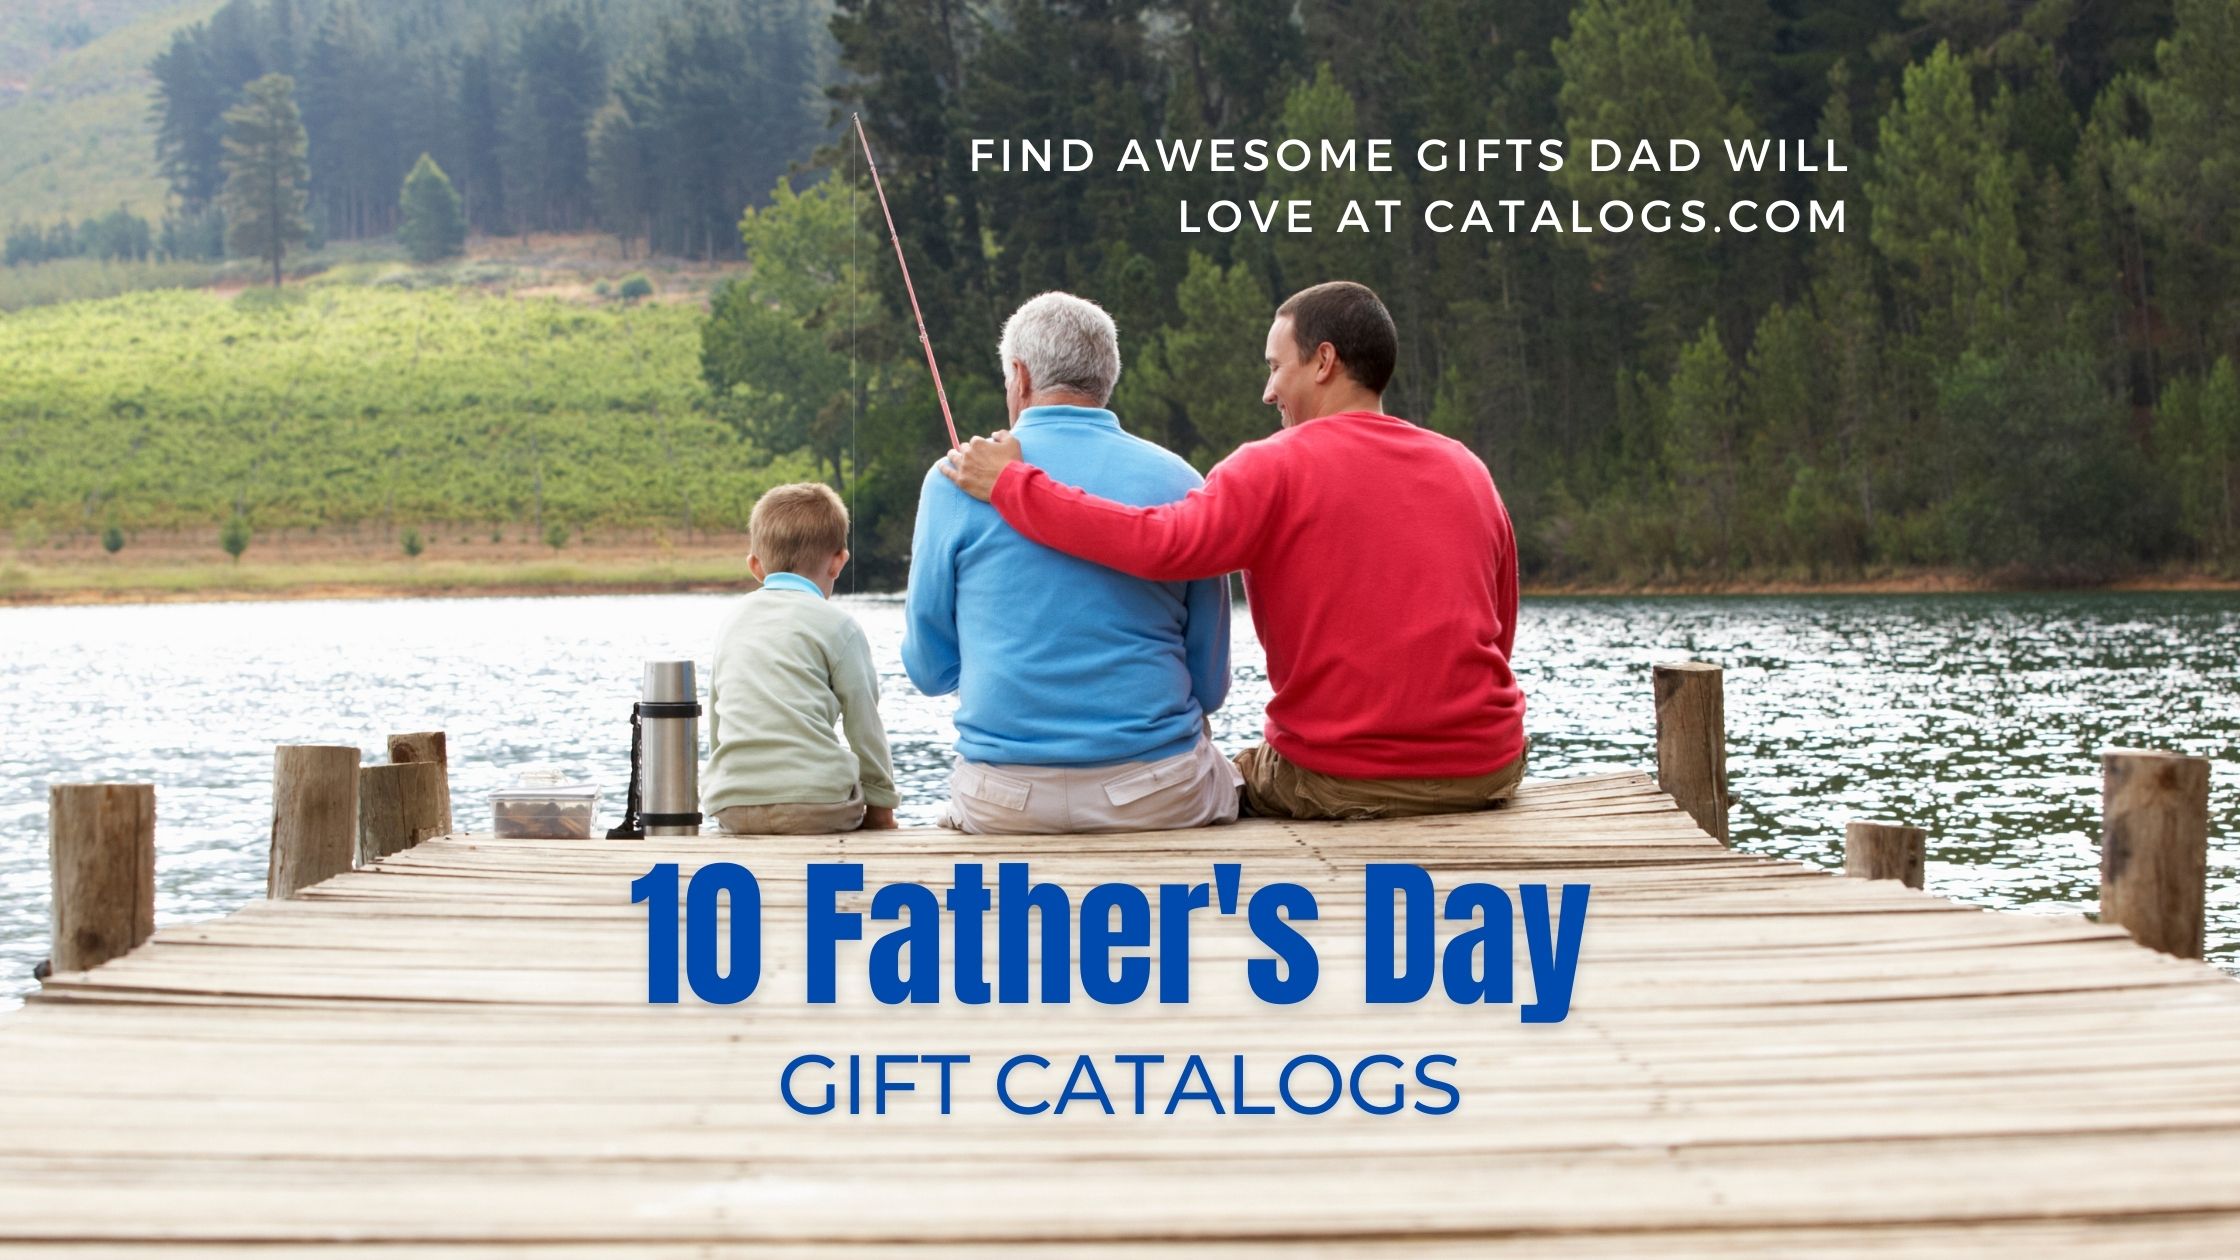 10 Father’s Day Gift Catalogs: Find Awesome Gifts Dad Will Love at Catalogs.com